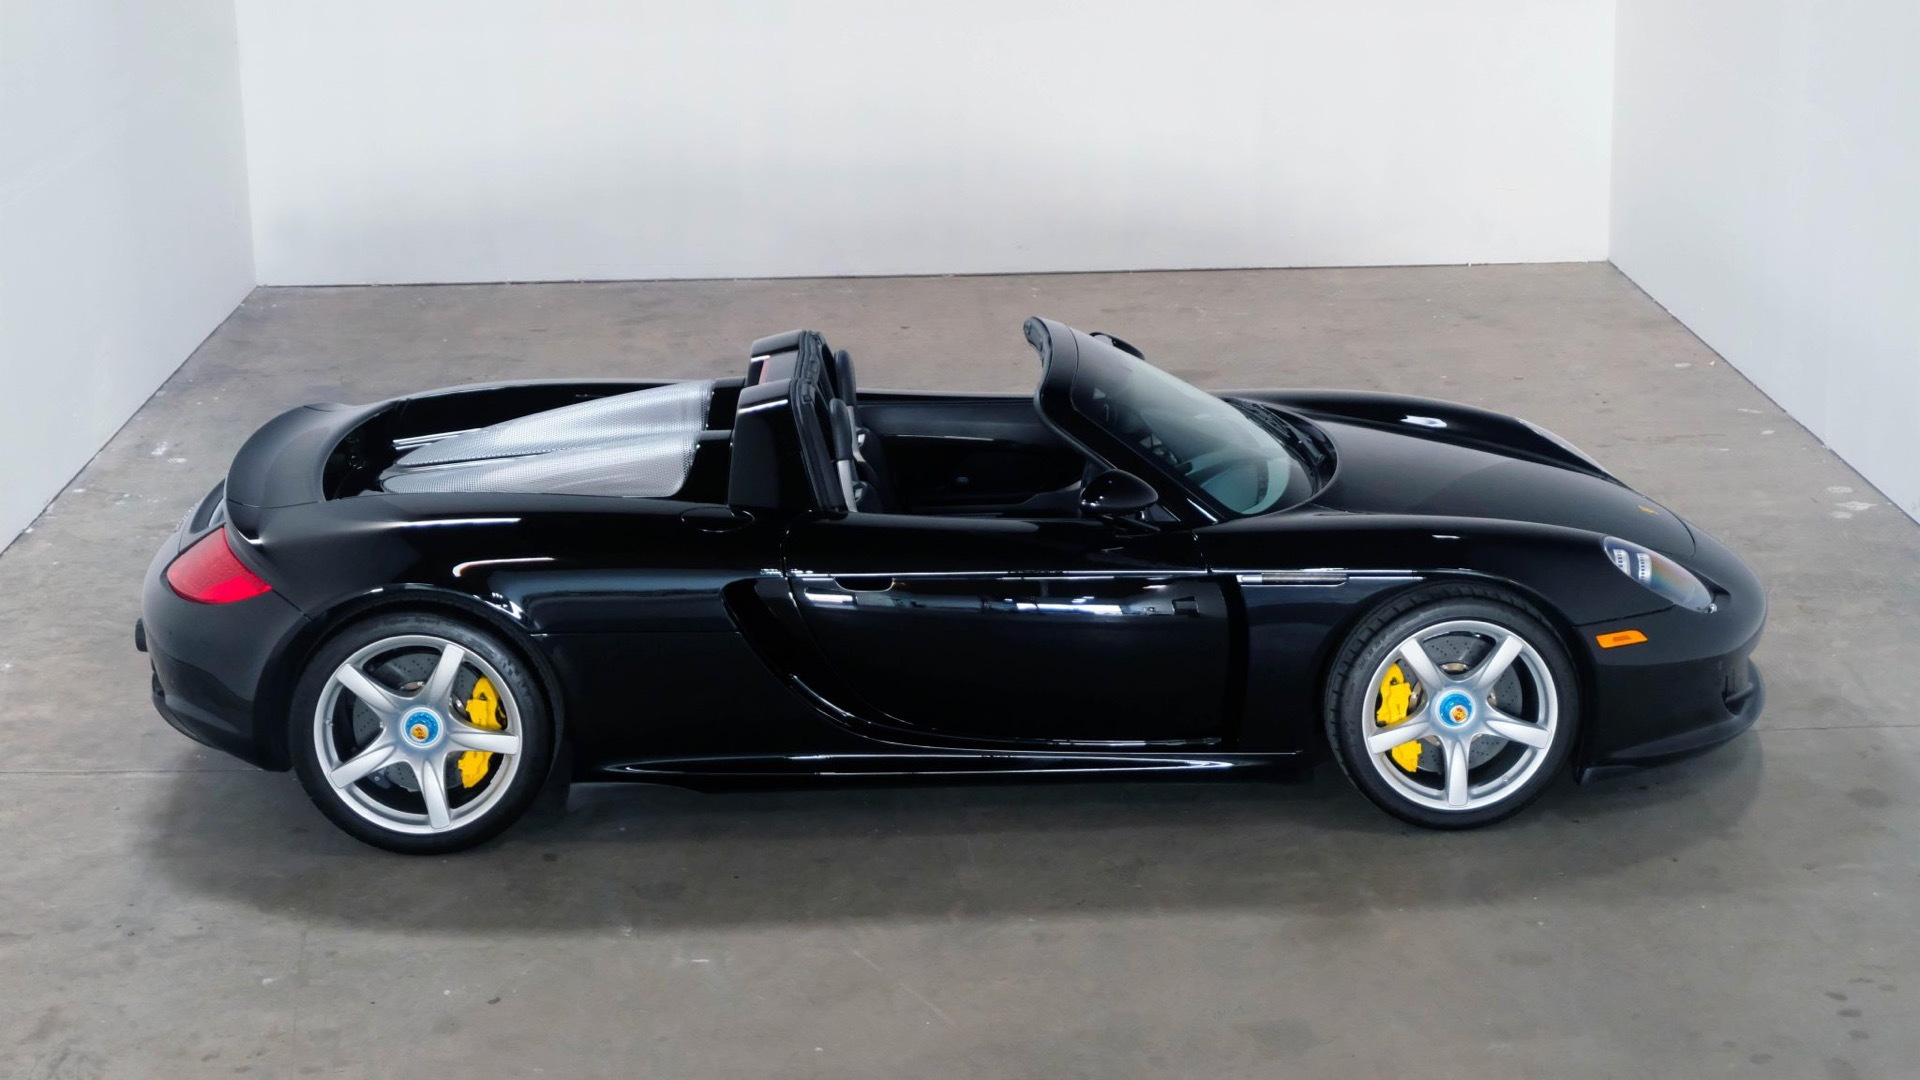 2004 Porsche Carrera GT once owned by Jerry Seinfeld (photo via Bring a Trailer)